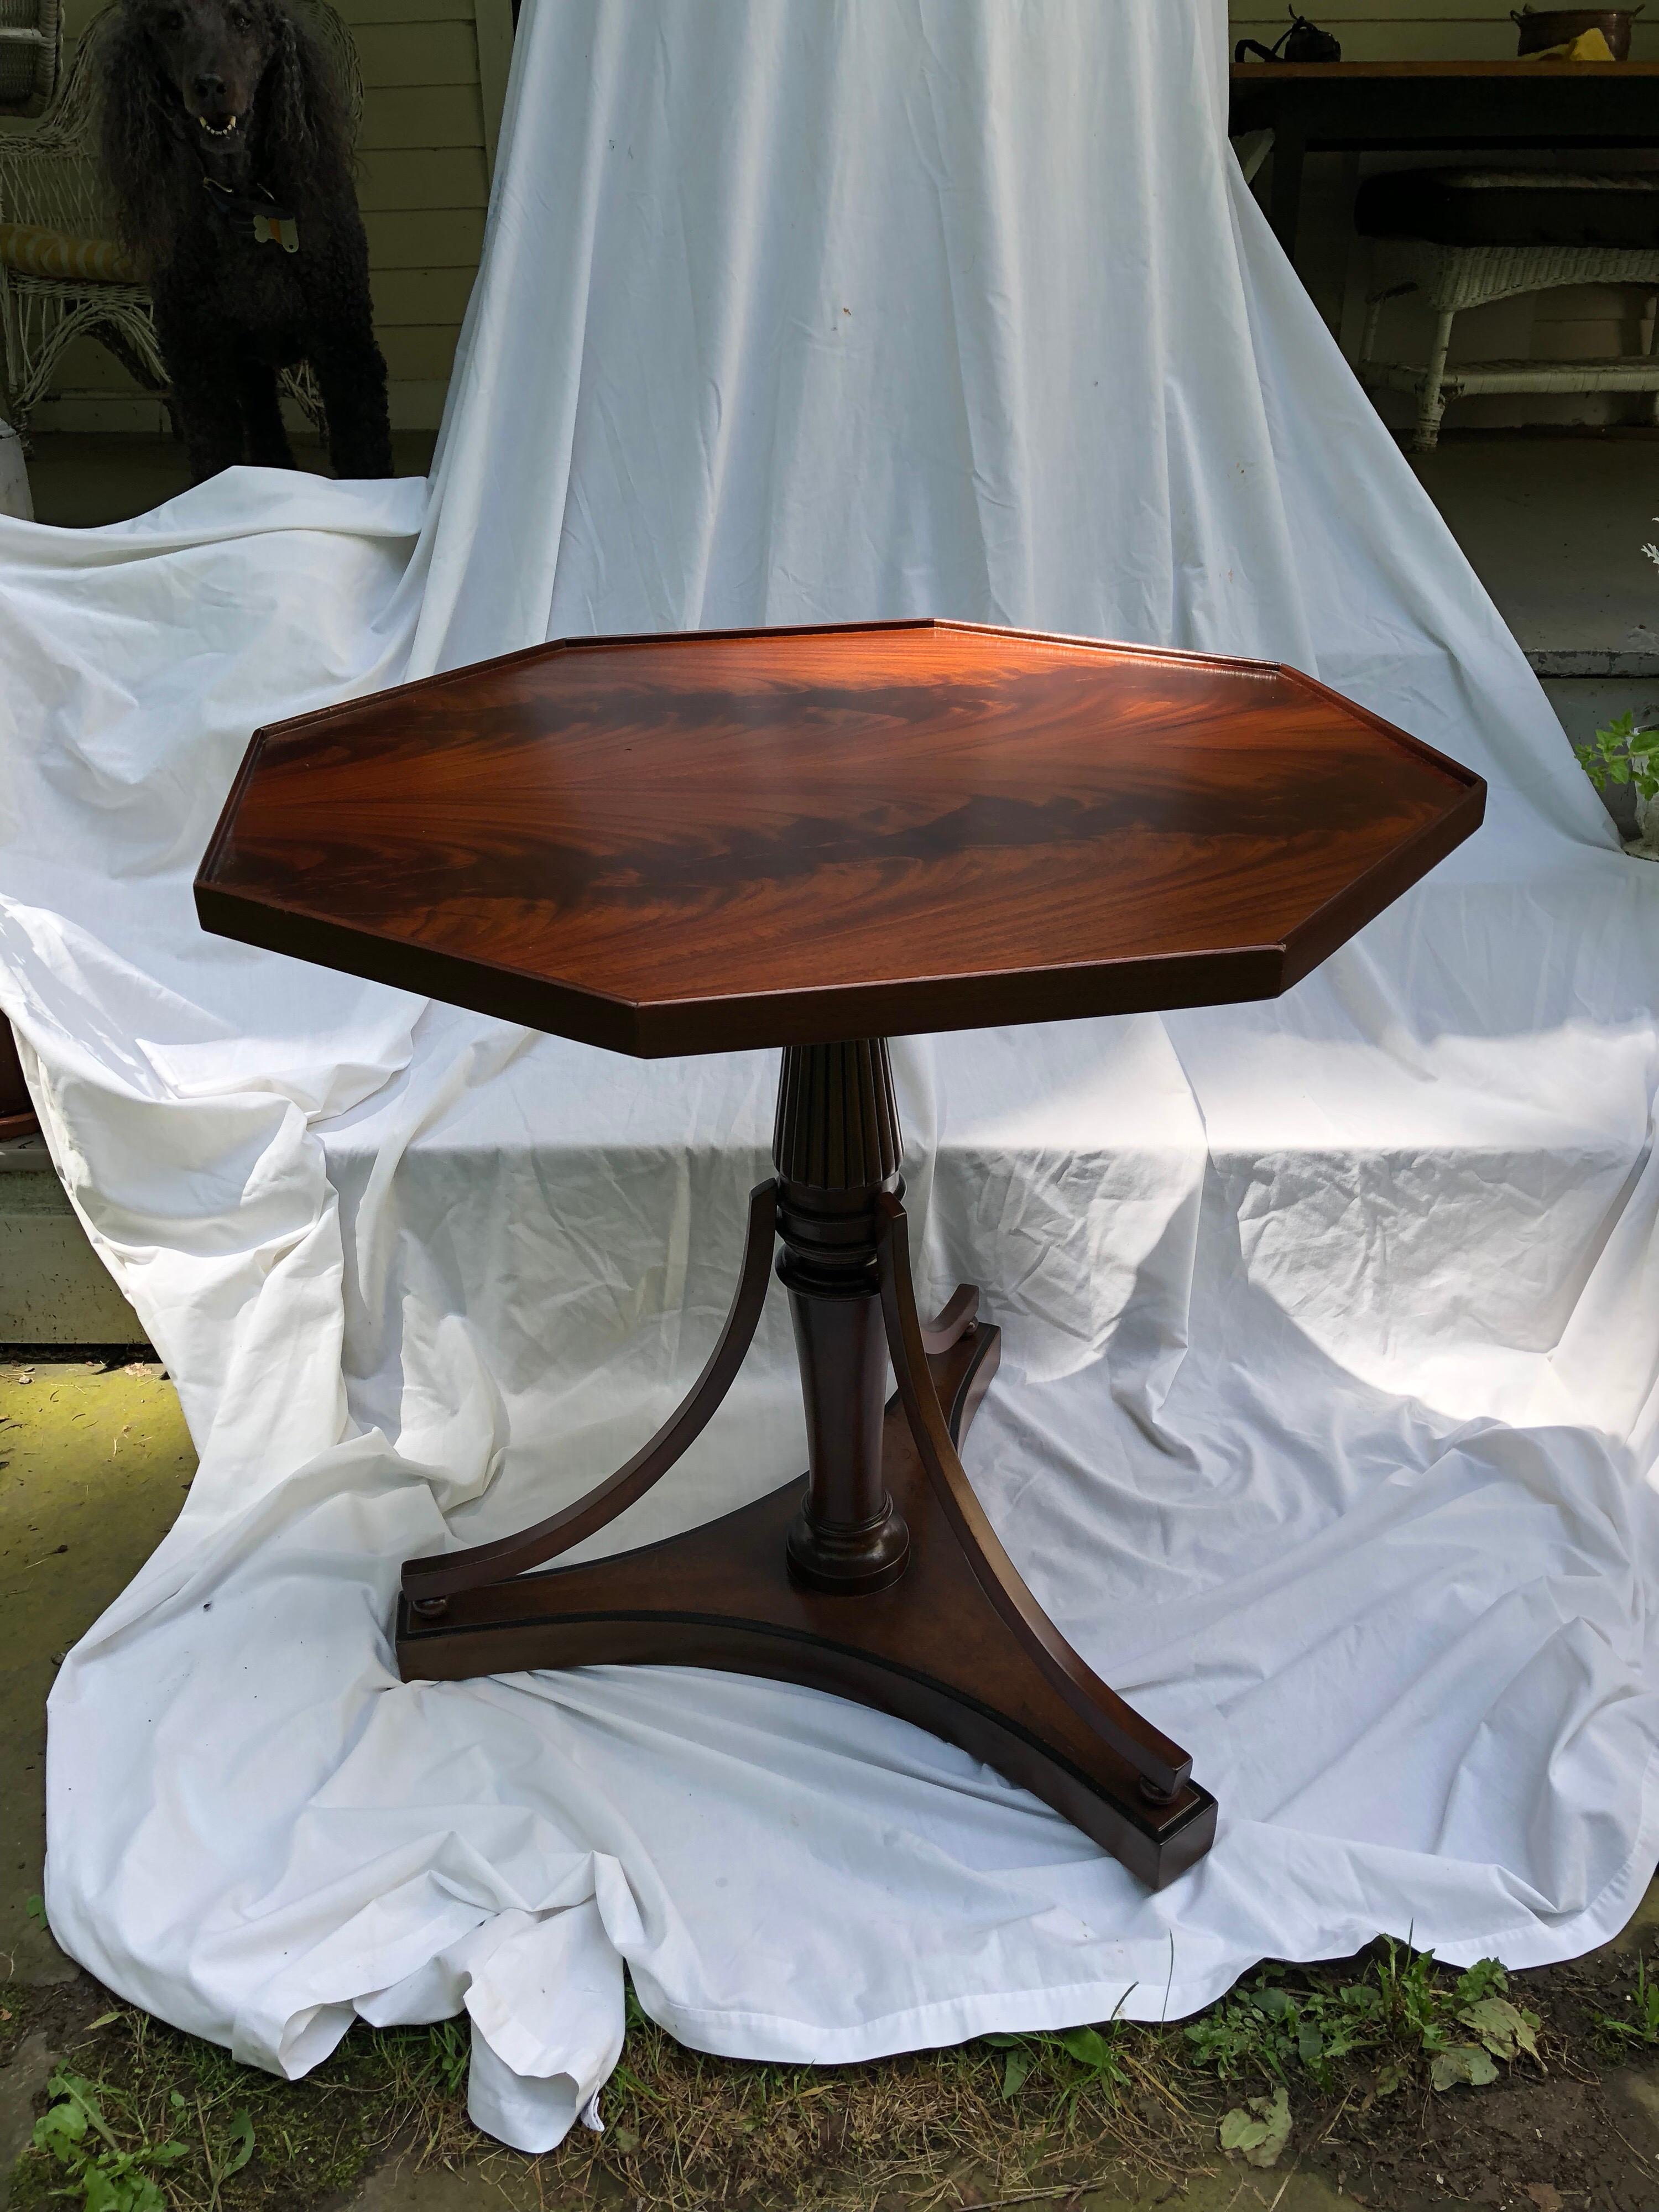 Sheraton style octagonal table in beautiful crotch mahogany on a tripod pedestal base. Base decorated with black painted stringing.